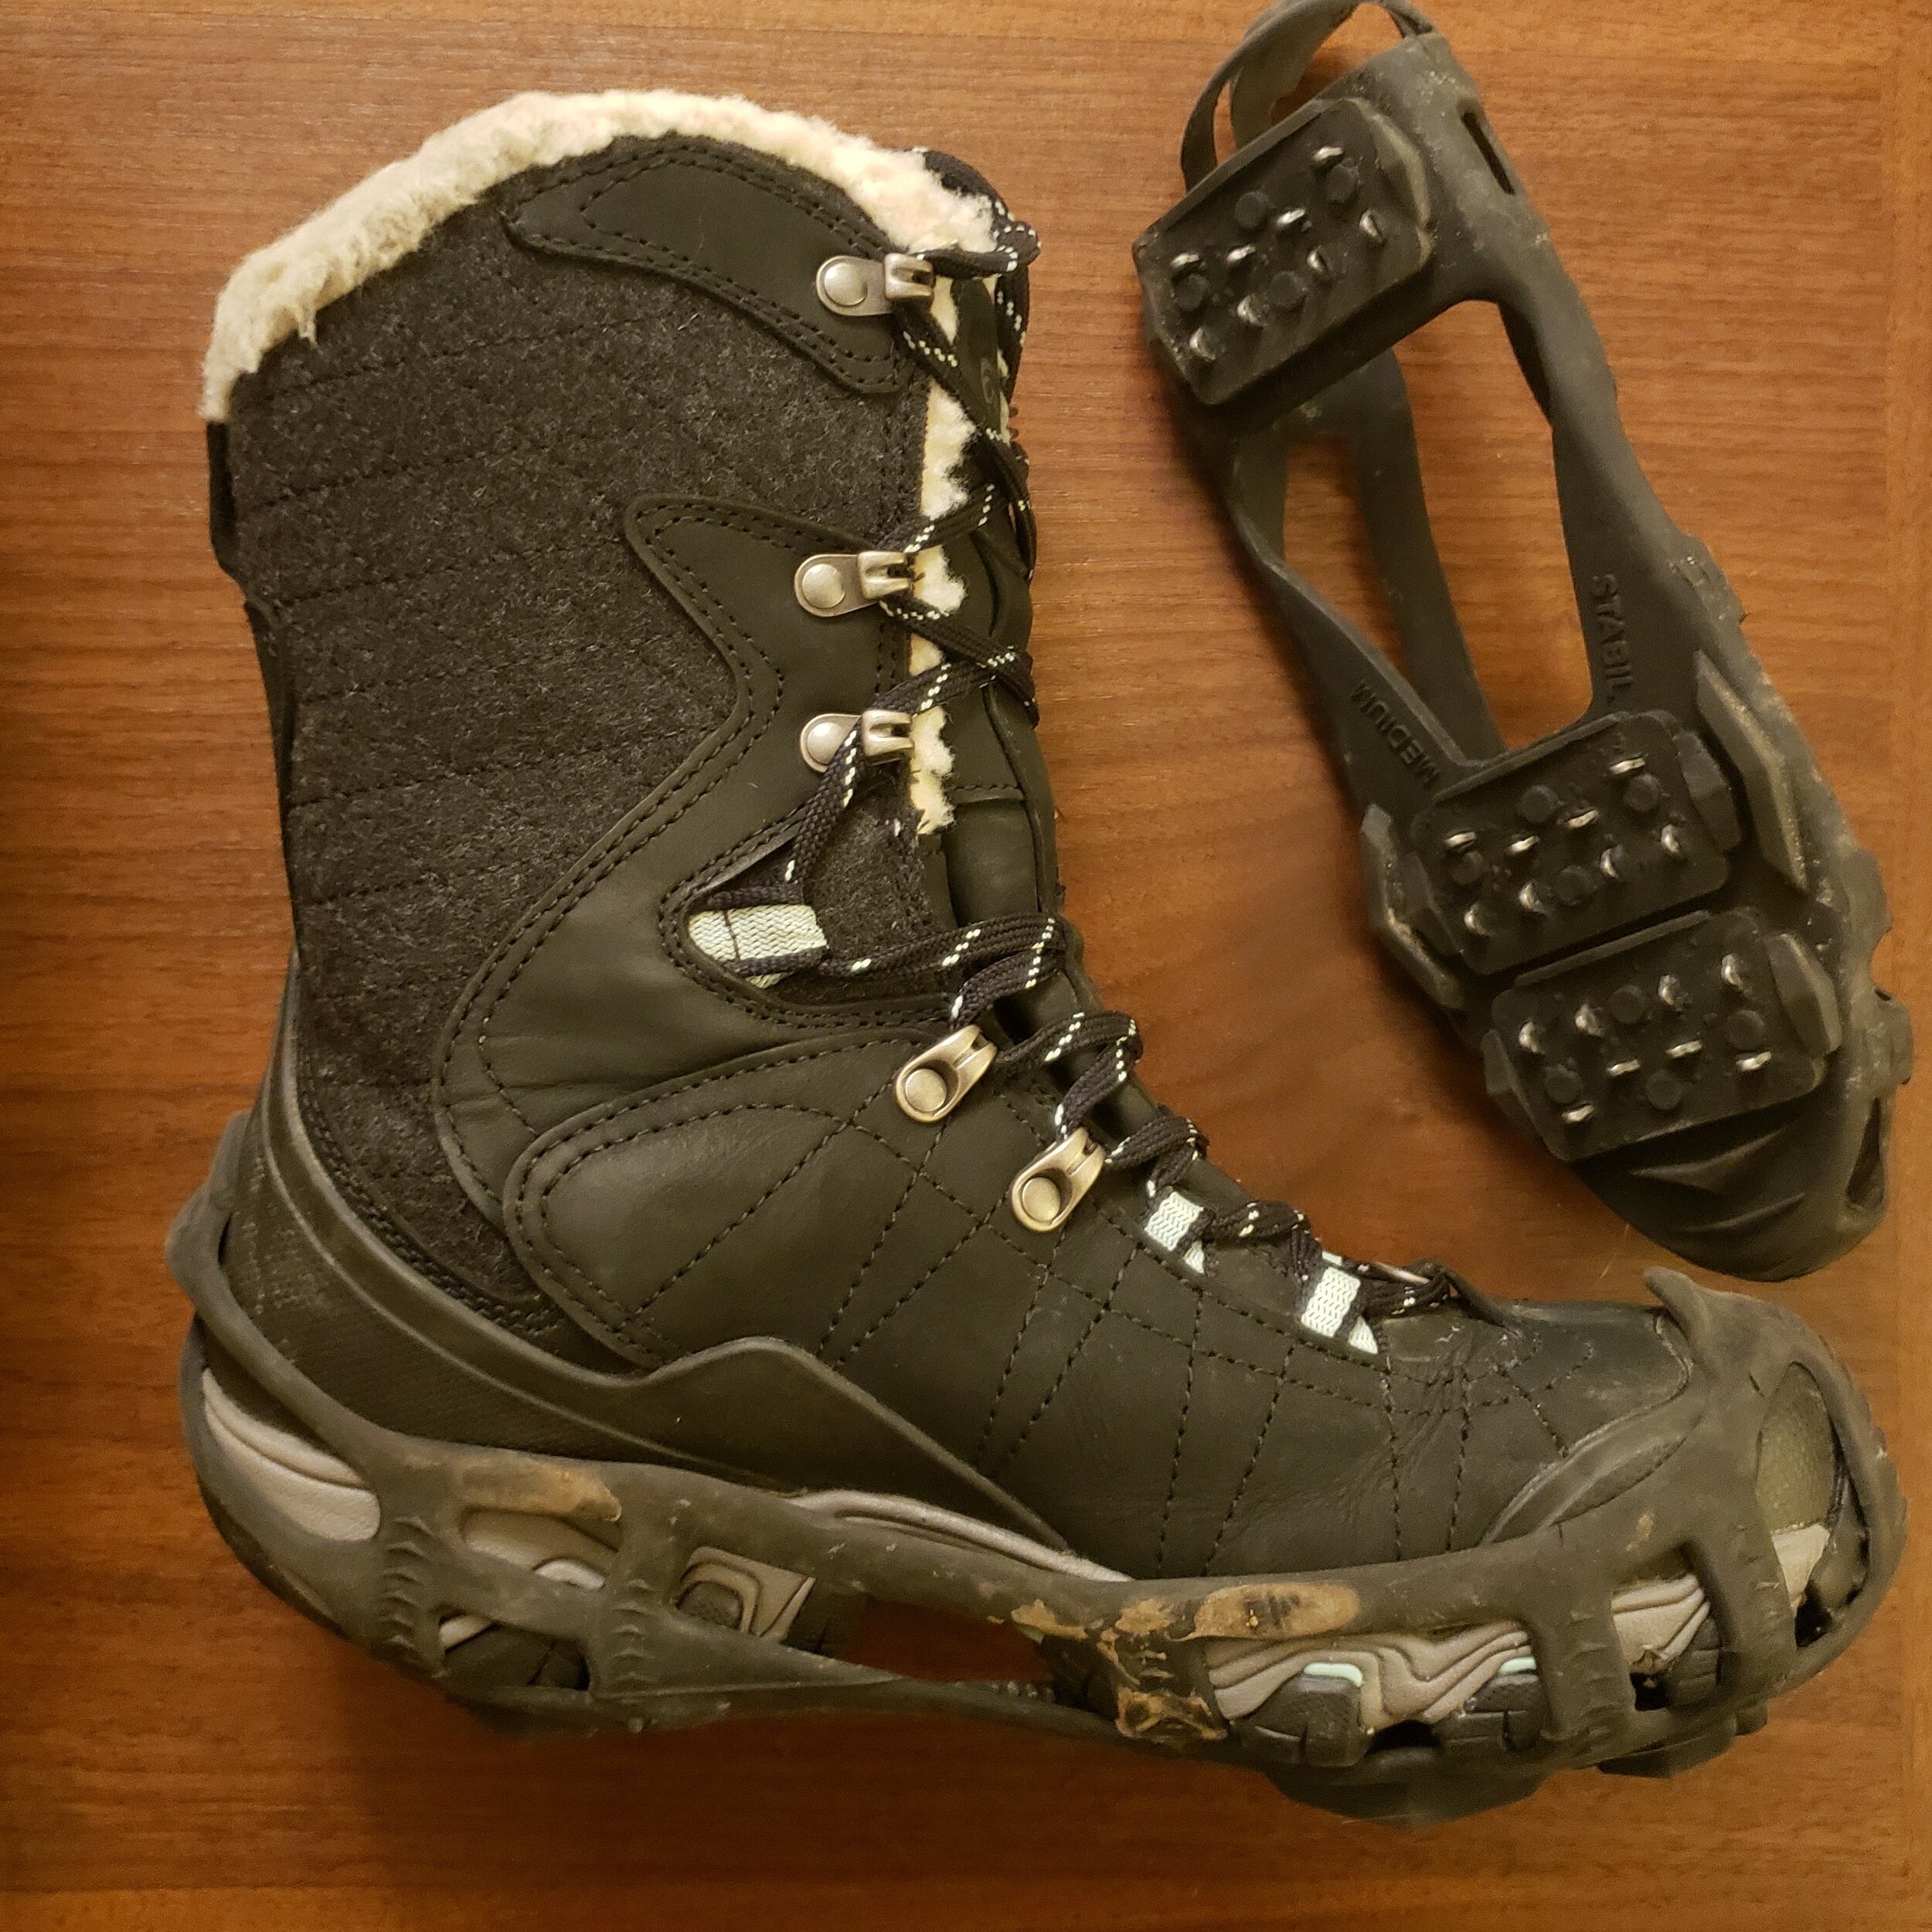 Traction devices slip over your boots